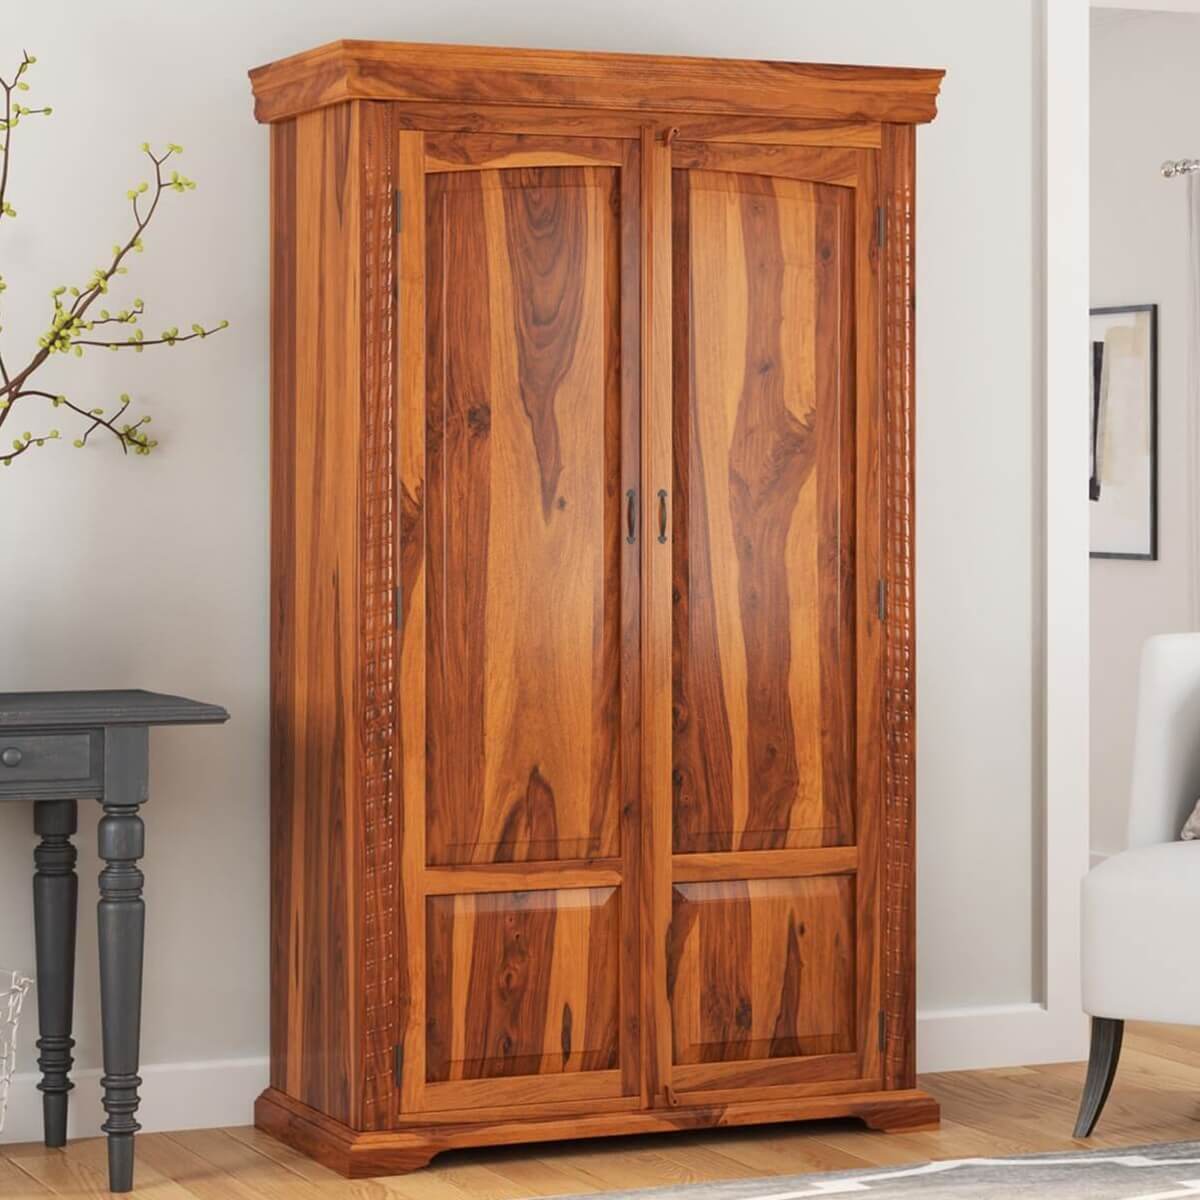 https://www.sierralivingconcepts.com/images/thumbs/0392925_empire-bedroom-transitional-solid-wood-large-armoire-wardrobe-with-shelves.jpeg